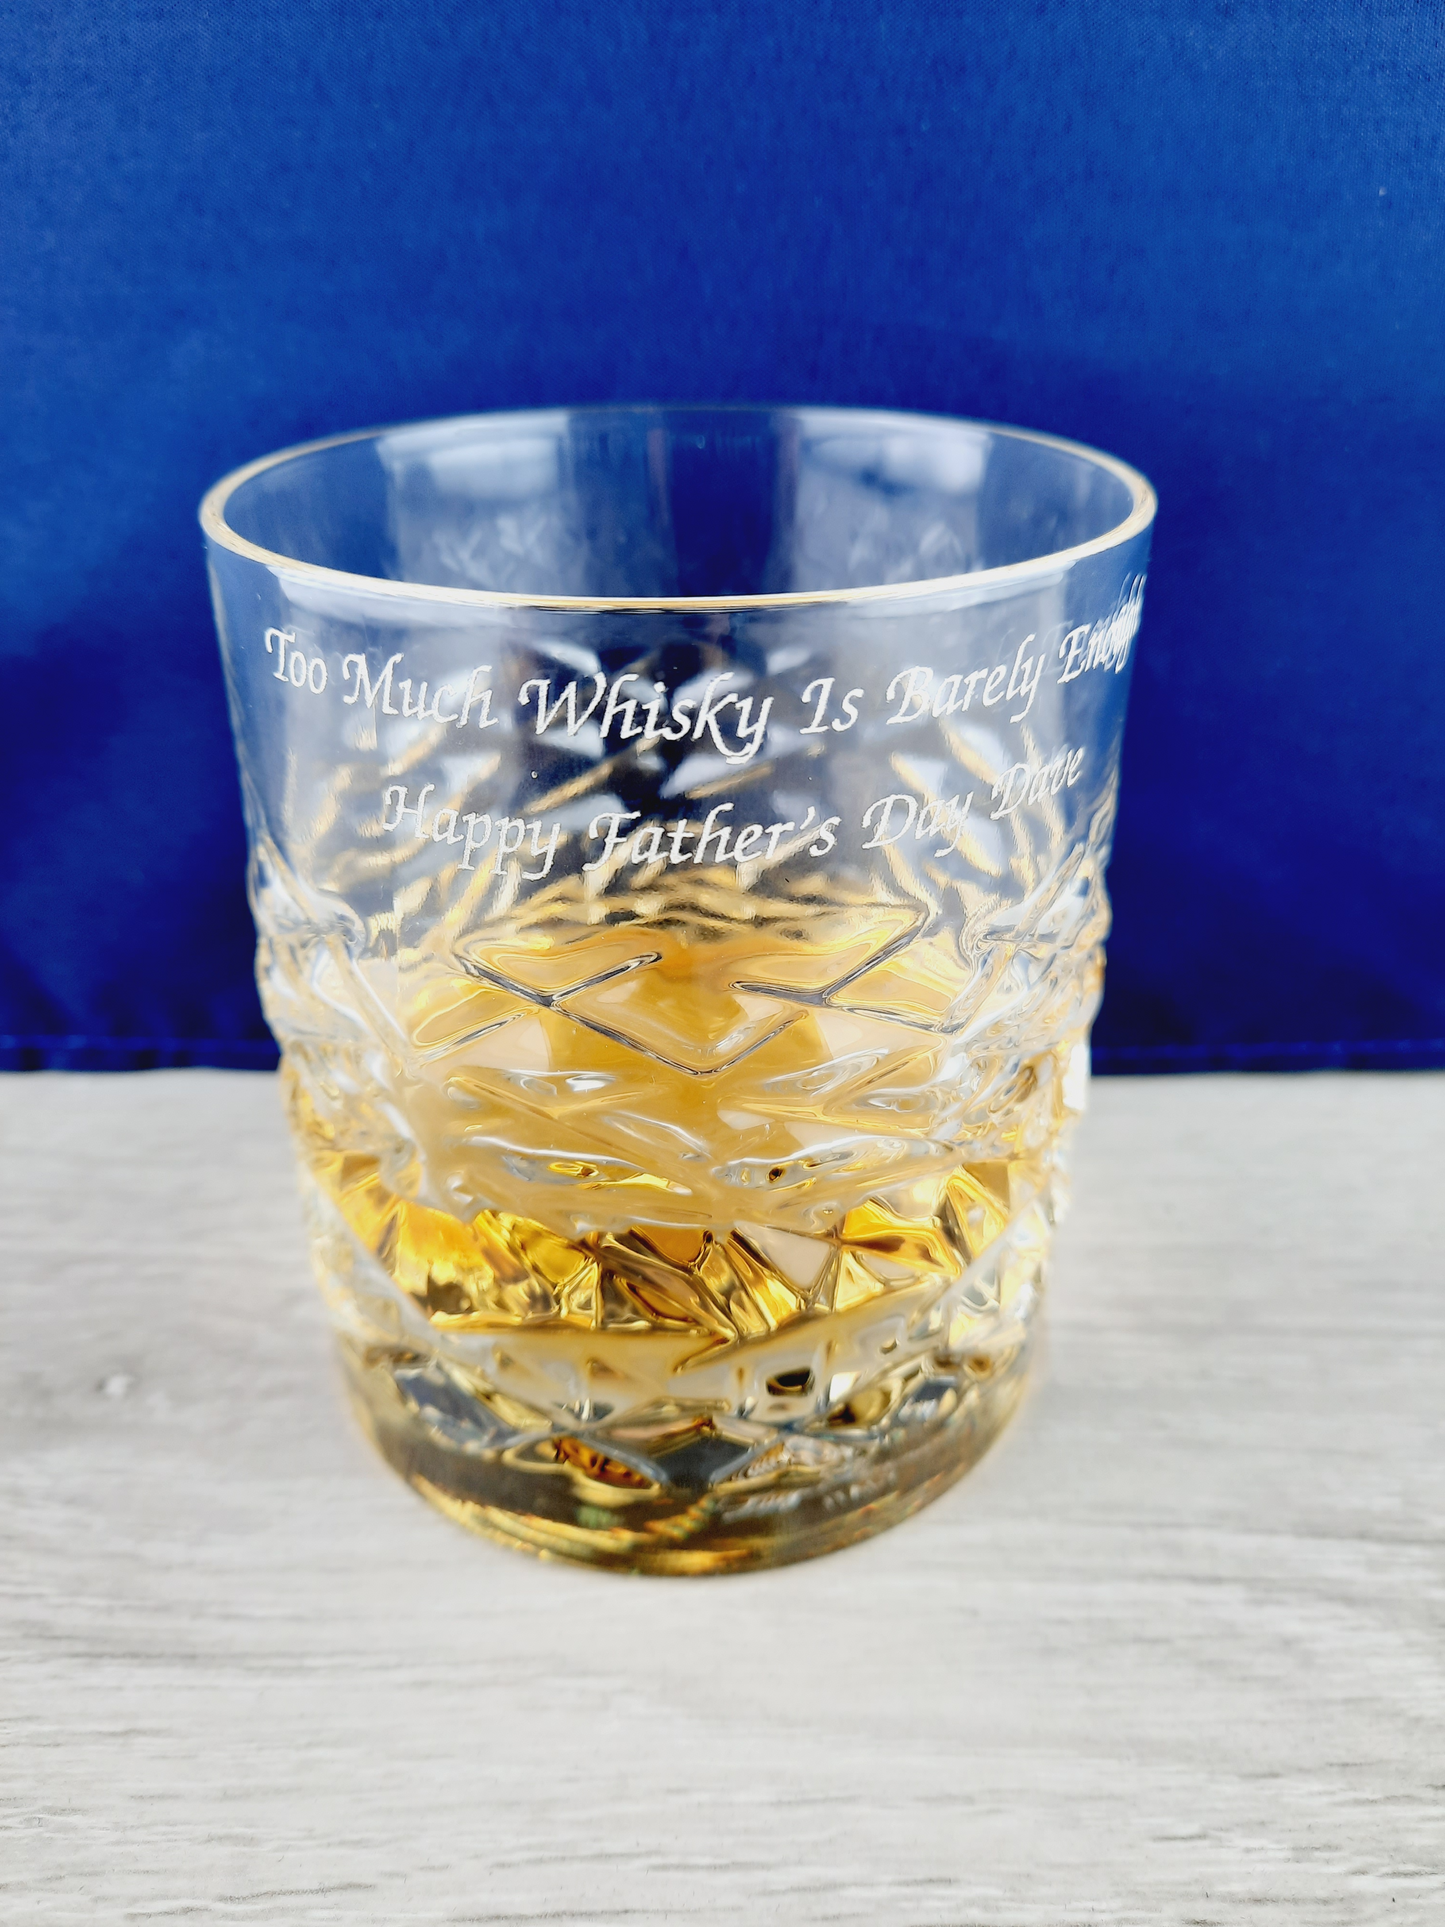 Personalised Engraved Whisky Glass & Coaster Gift Set, Crystal Cut Whisky Glass